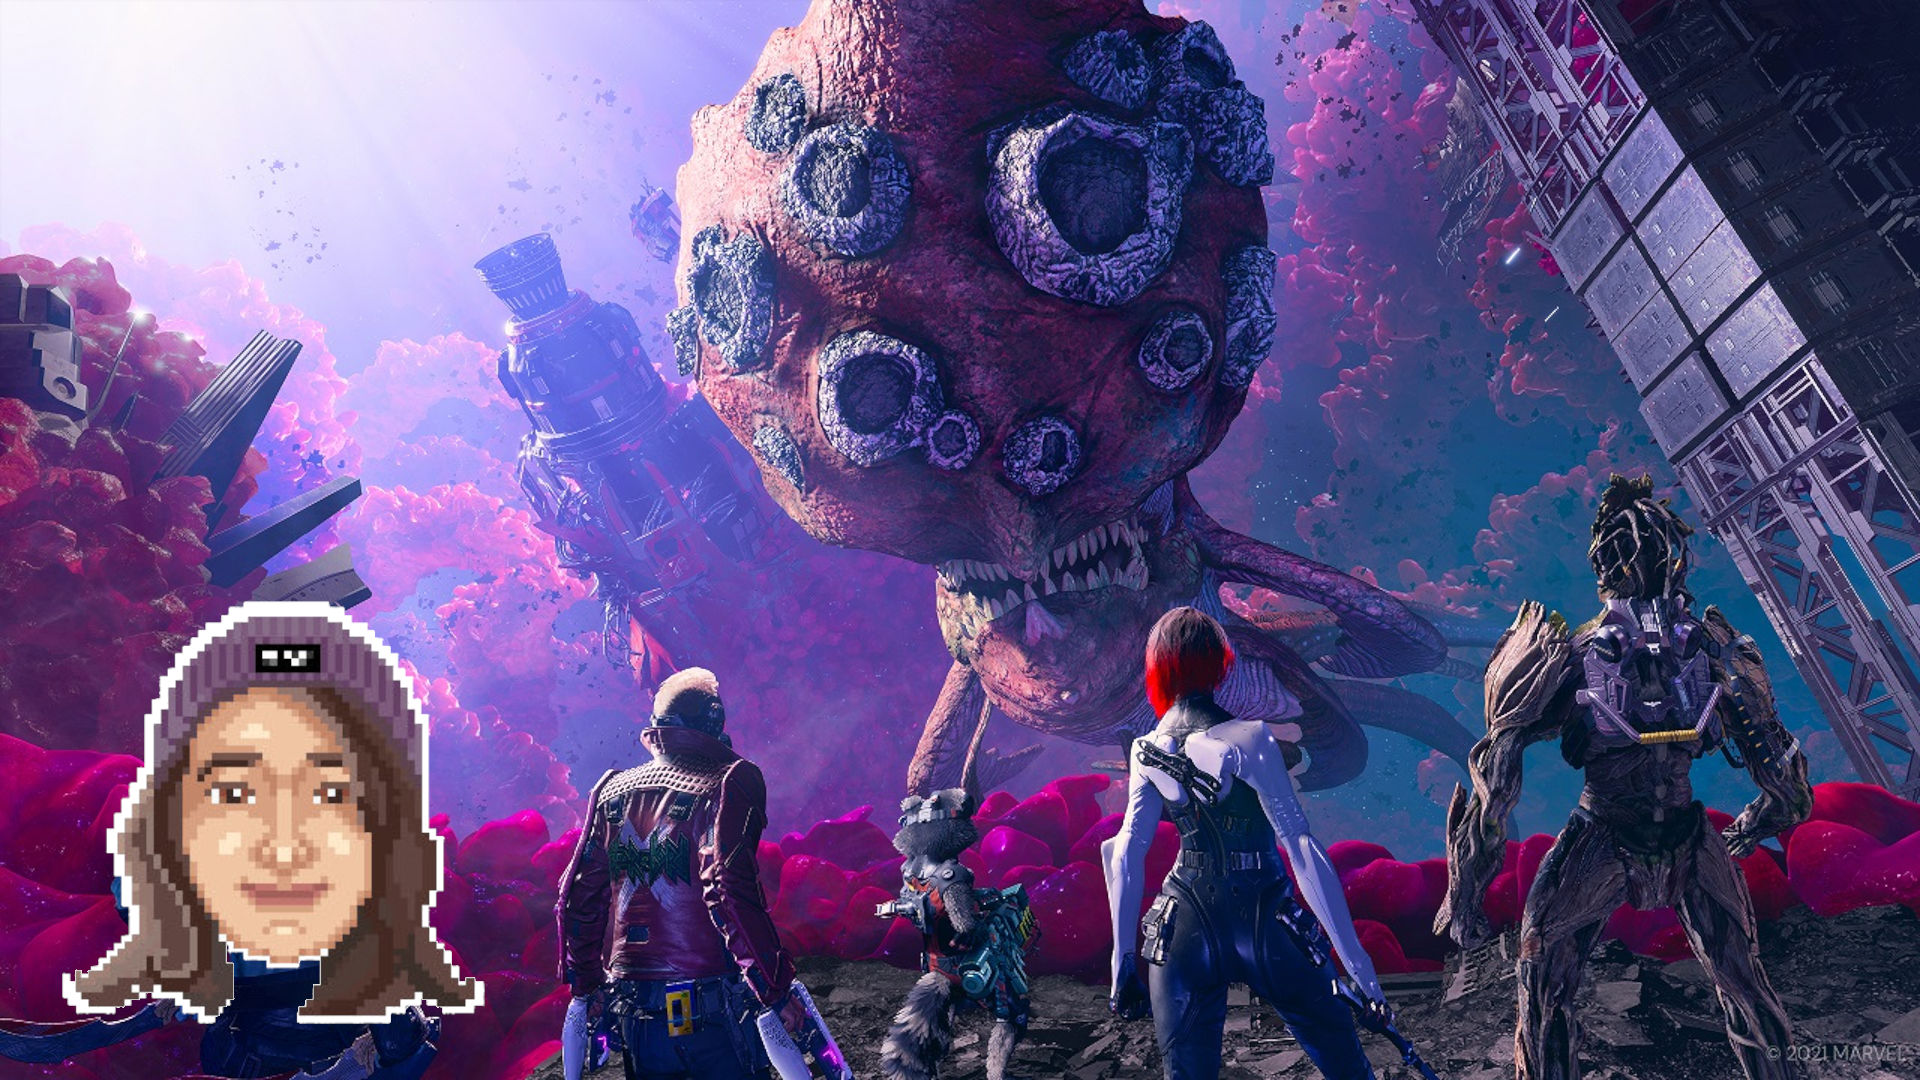 Kayleigh's pick for GOTY, Guardian's of the Galaxy, showing the Guardians in an alien land